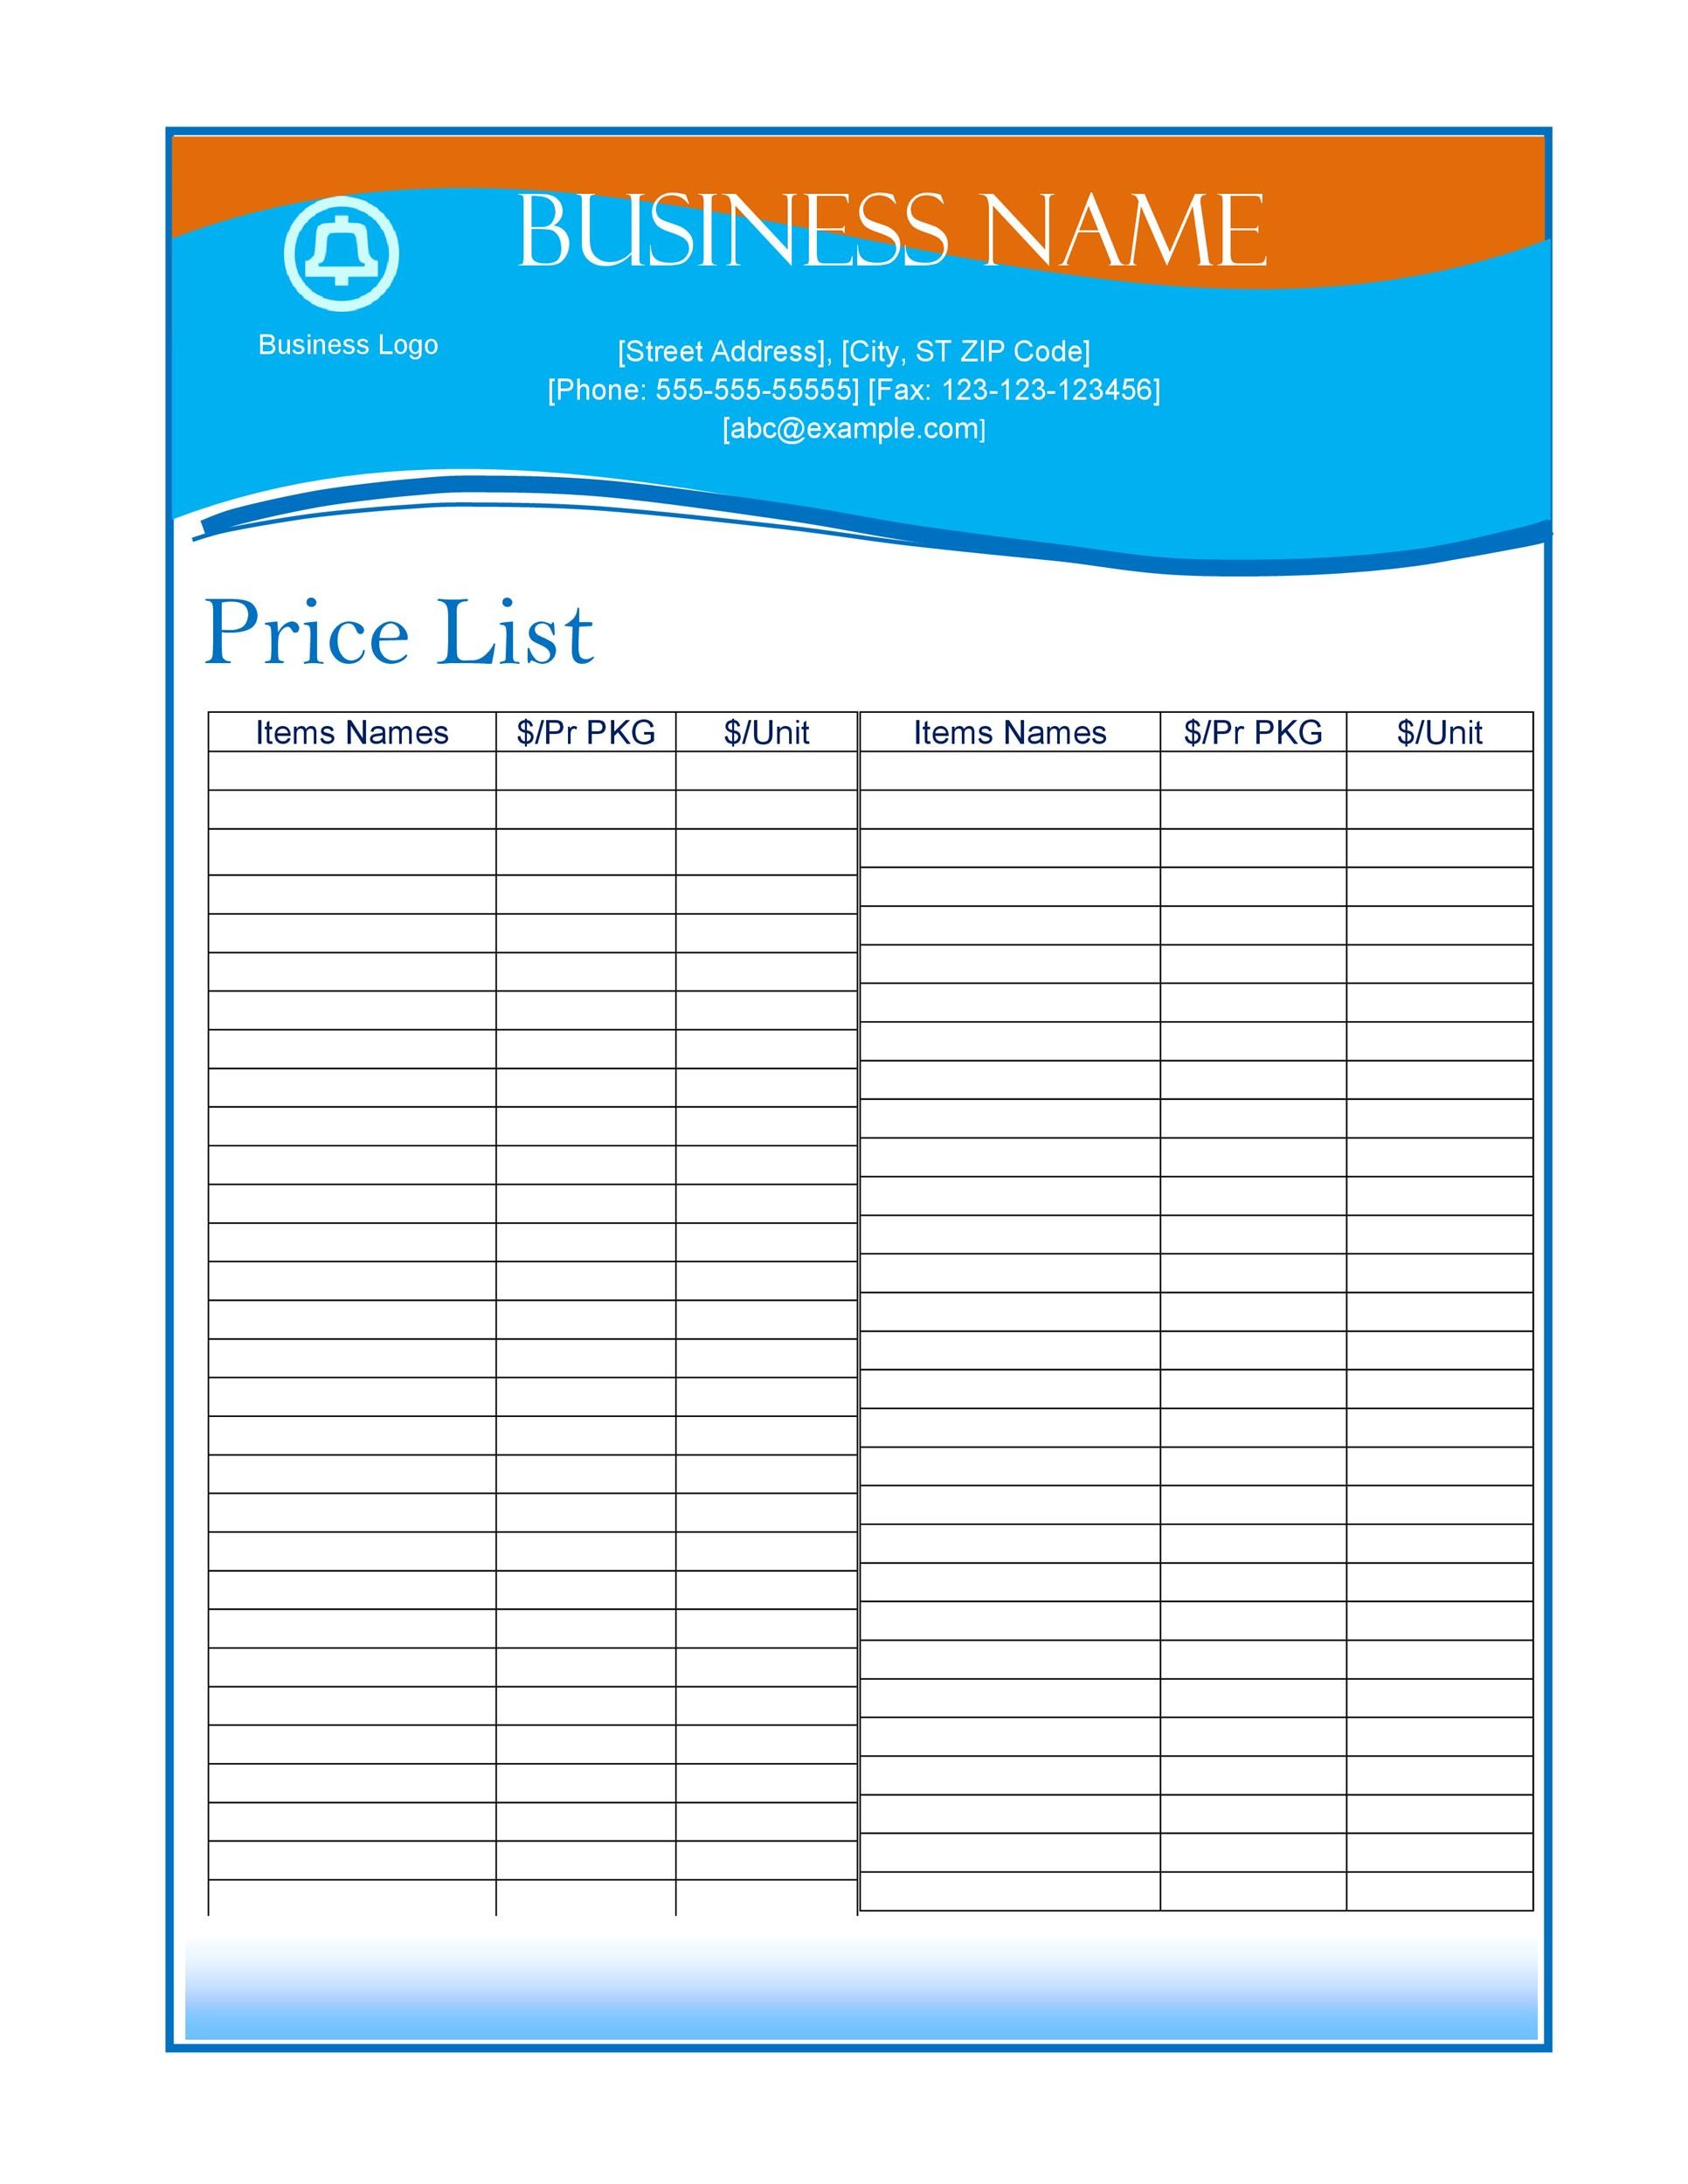 Excel Price List Template Free PRINTABLE TEMPLATES